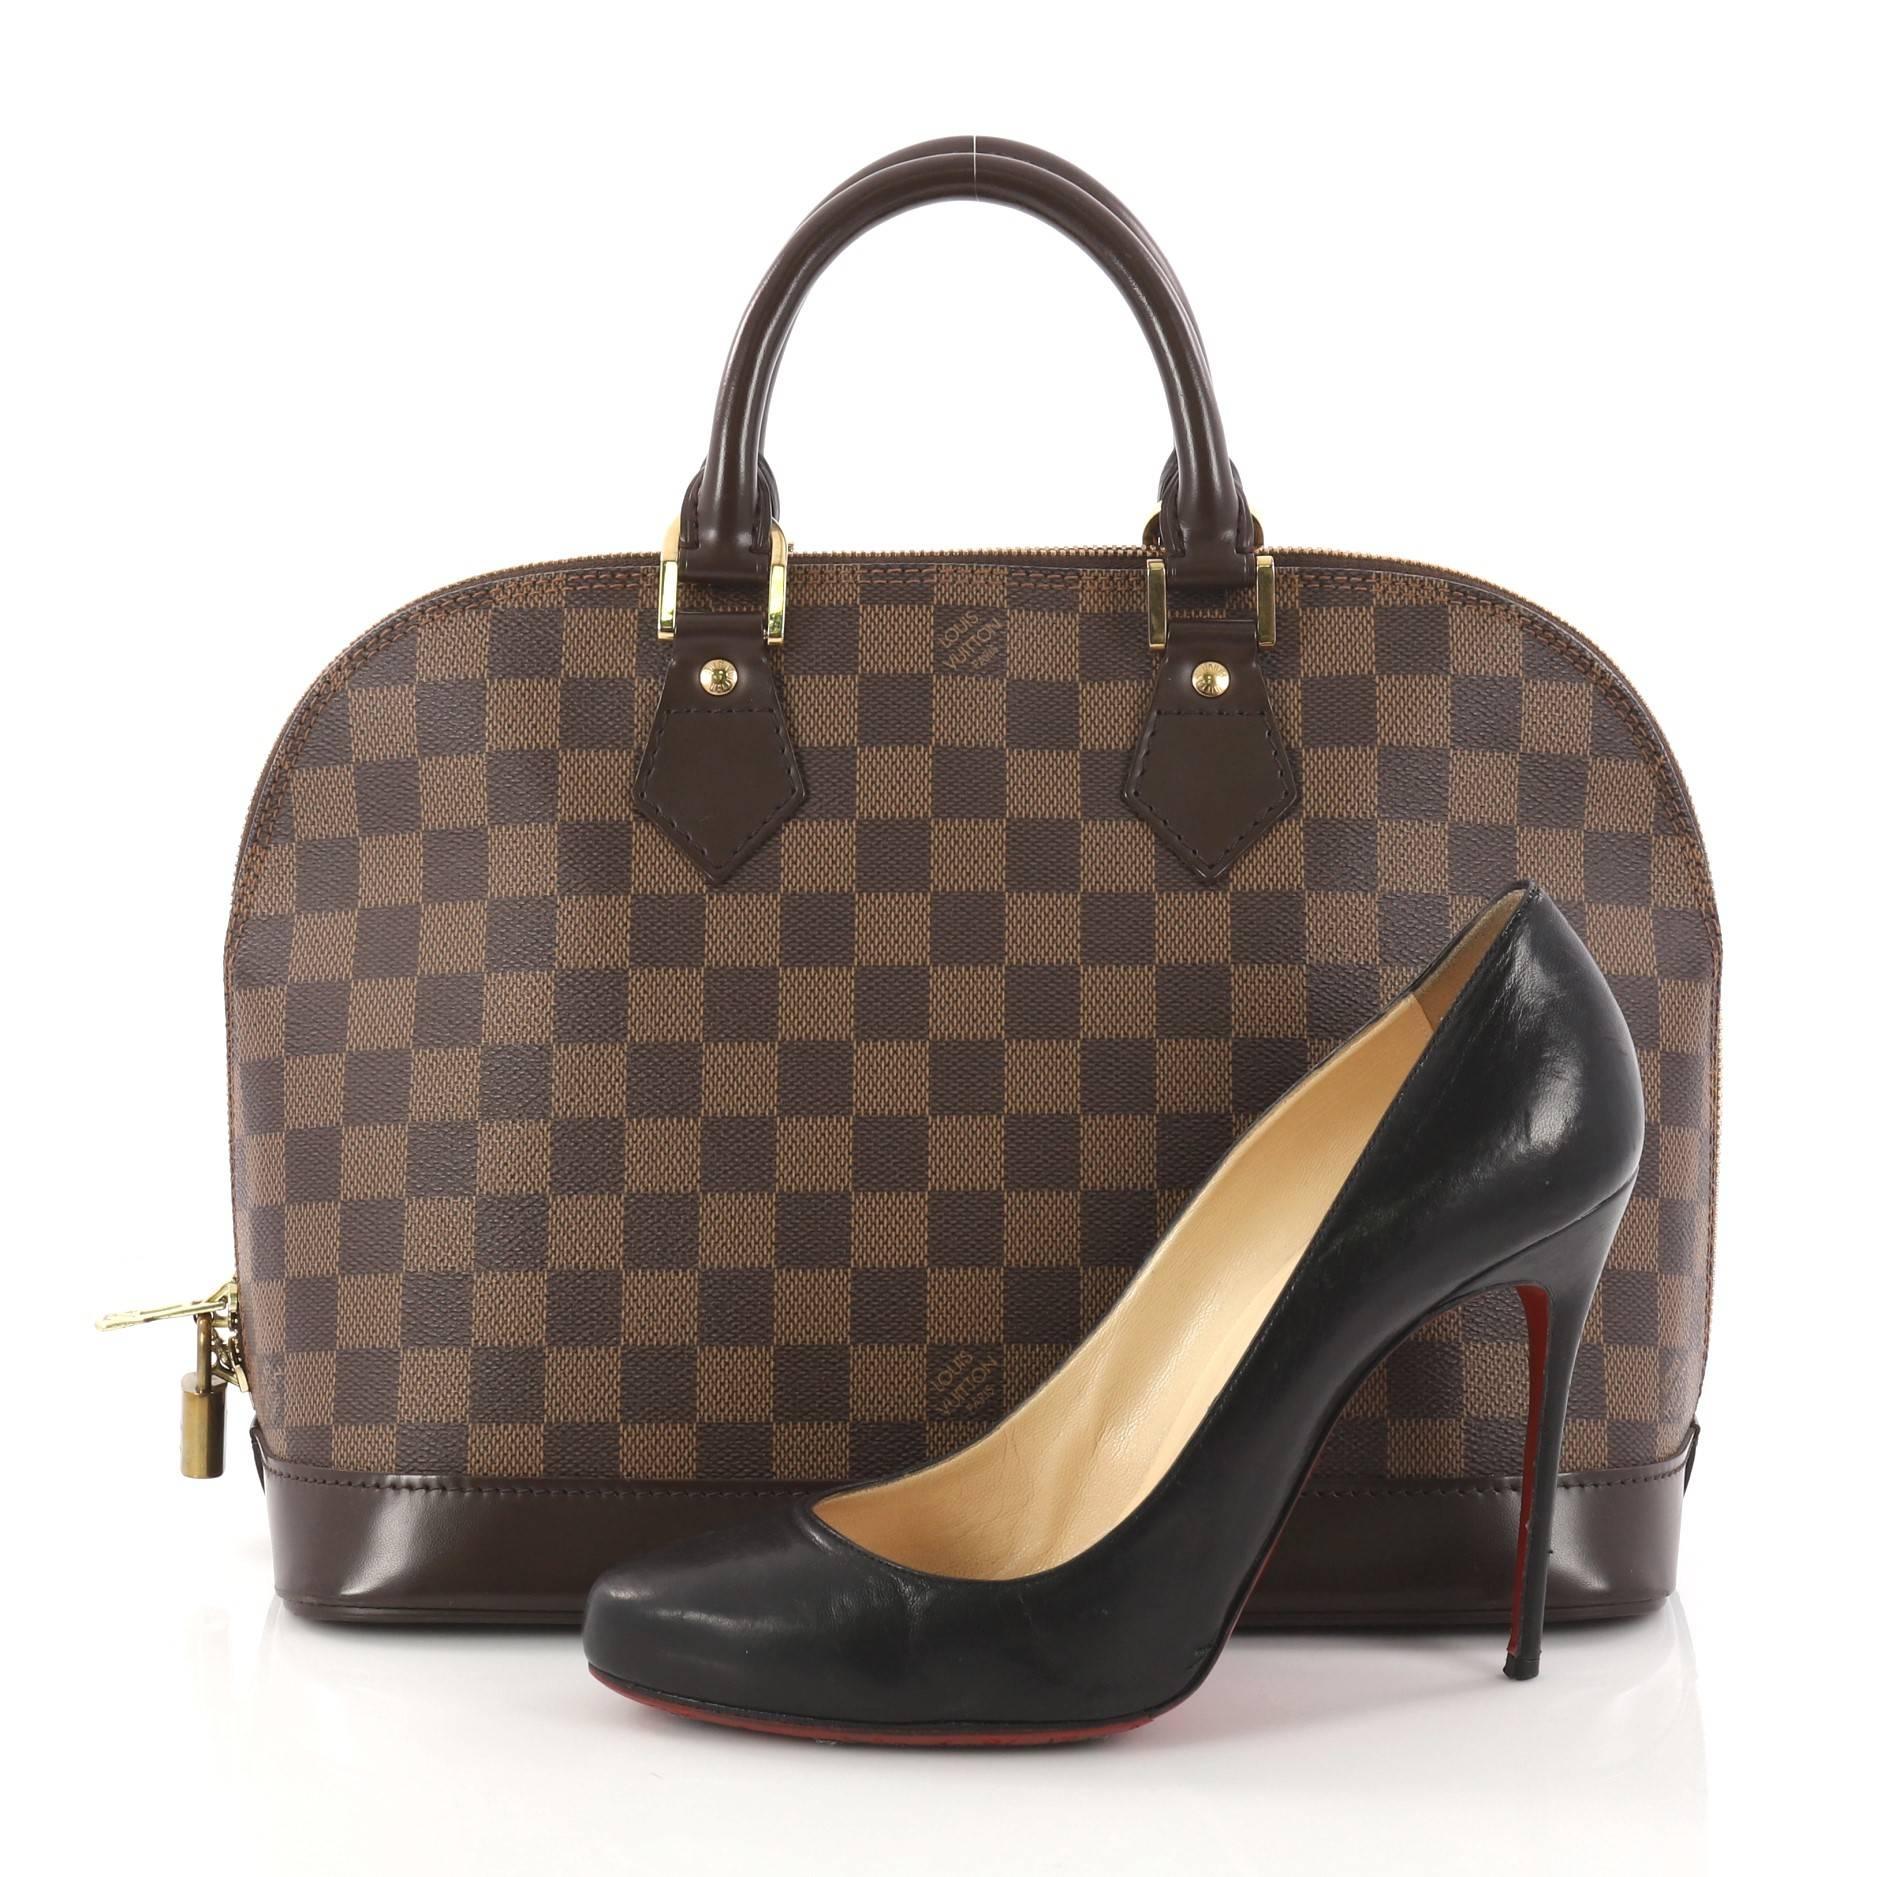 This authentic Louis Vuitton Vintage Alma Handbag Damier PM is an elegant spin on a classic style that is perfect for all seasons. Crafted from Louis Vuitton's damier ebene coated canvas, this iconic dome-shaped satchel features dual-rolled handles,